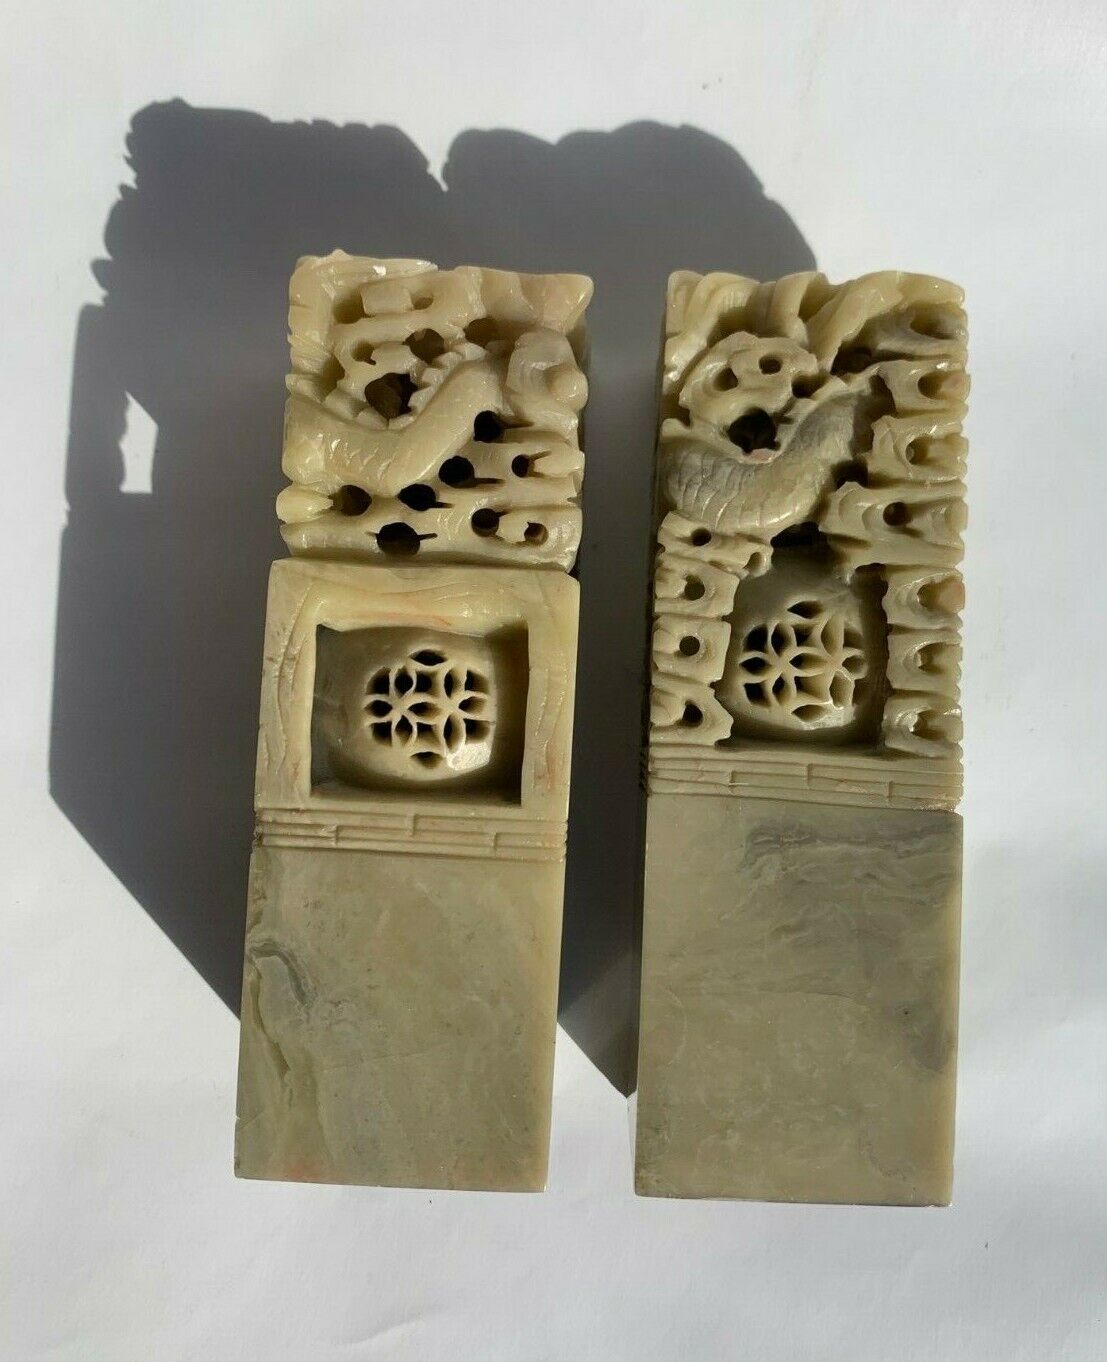 Two (2) CHINESE JADE HAND CARVED STONE NAME STAMPS - "MARTY" & "GIM" Без бренда - фотография #3